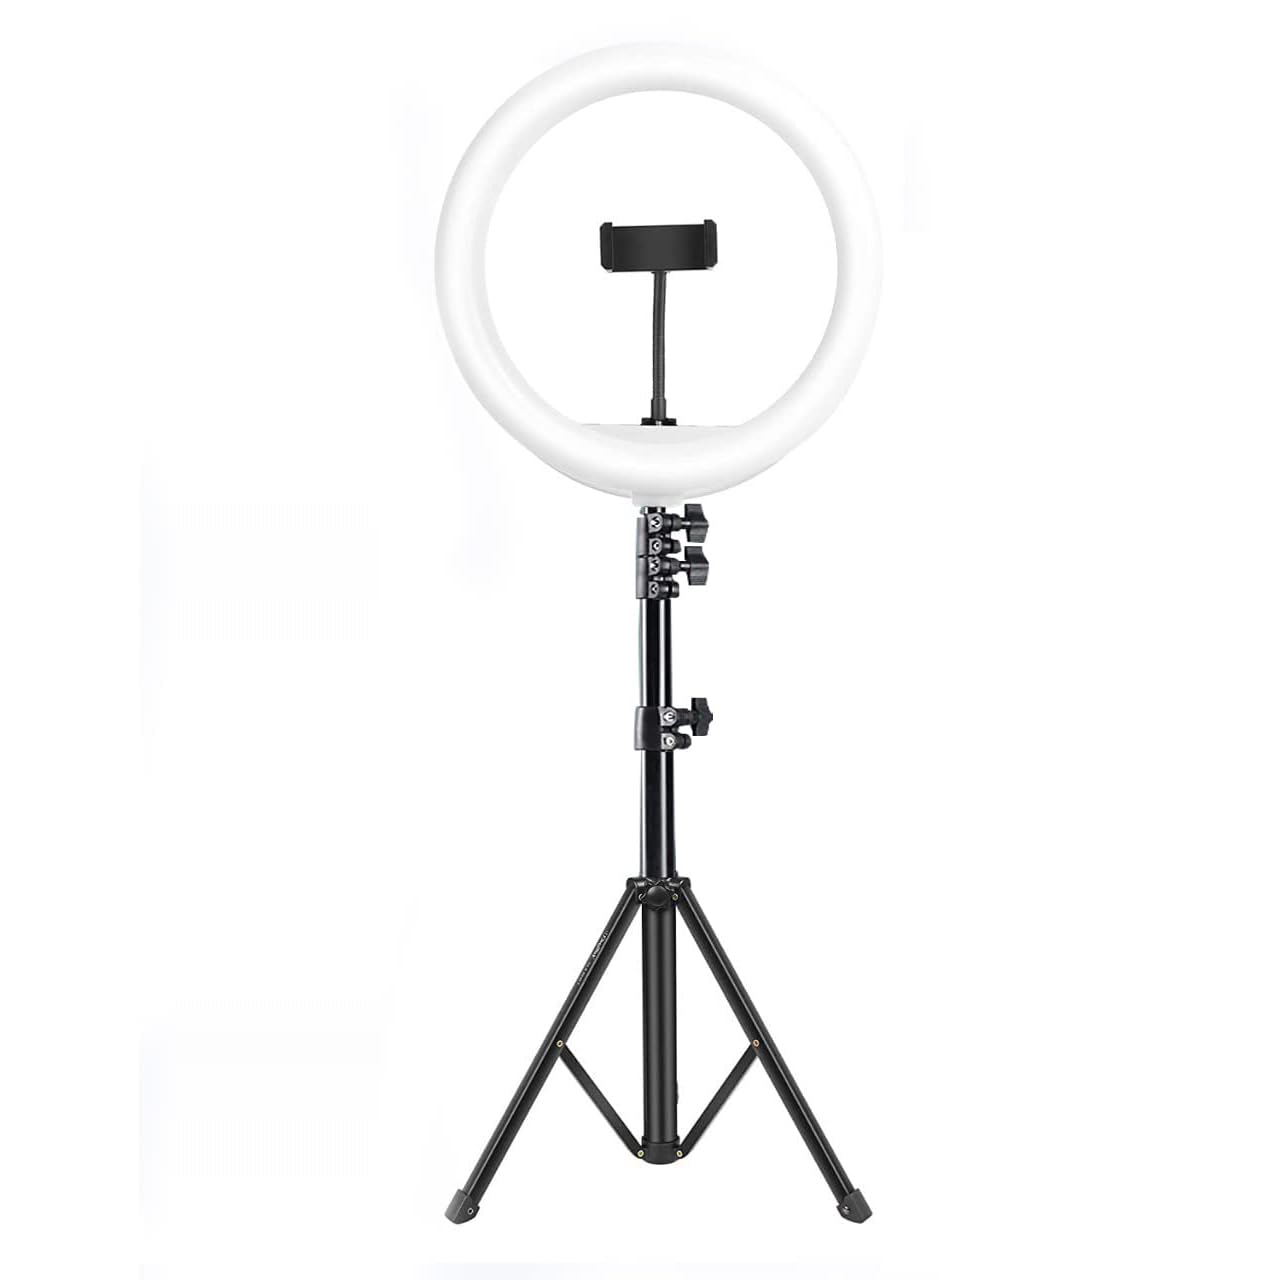 (DRL-14C) Professional (31cm) Dual Temperature LED Ring Light with Tripod Stand for YouTube, Photo-Shoot, Video Shoot, Live Stream, Makeup, Vlogging & More